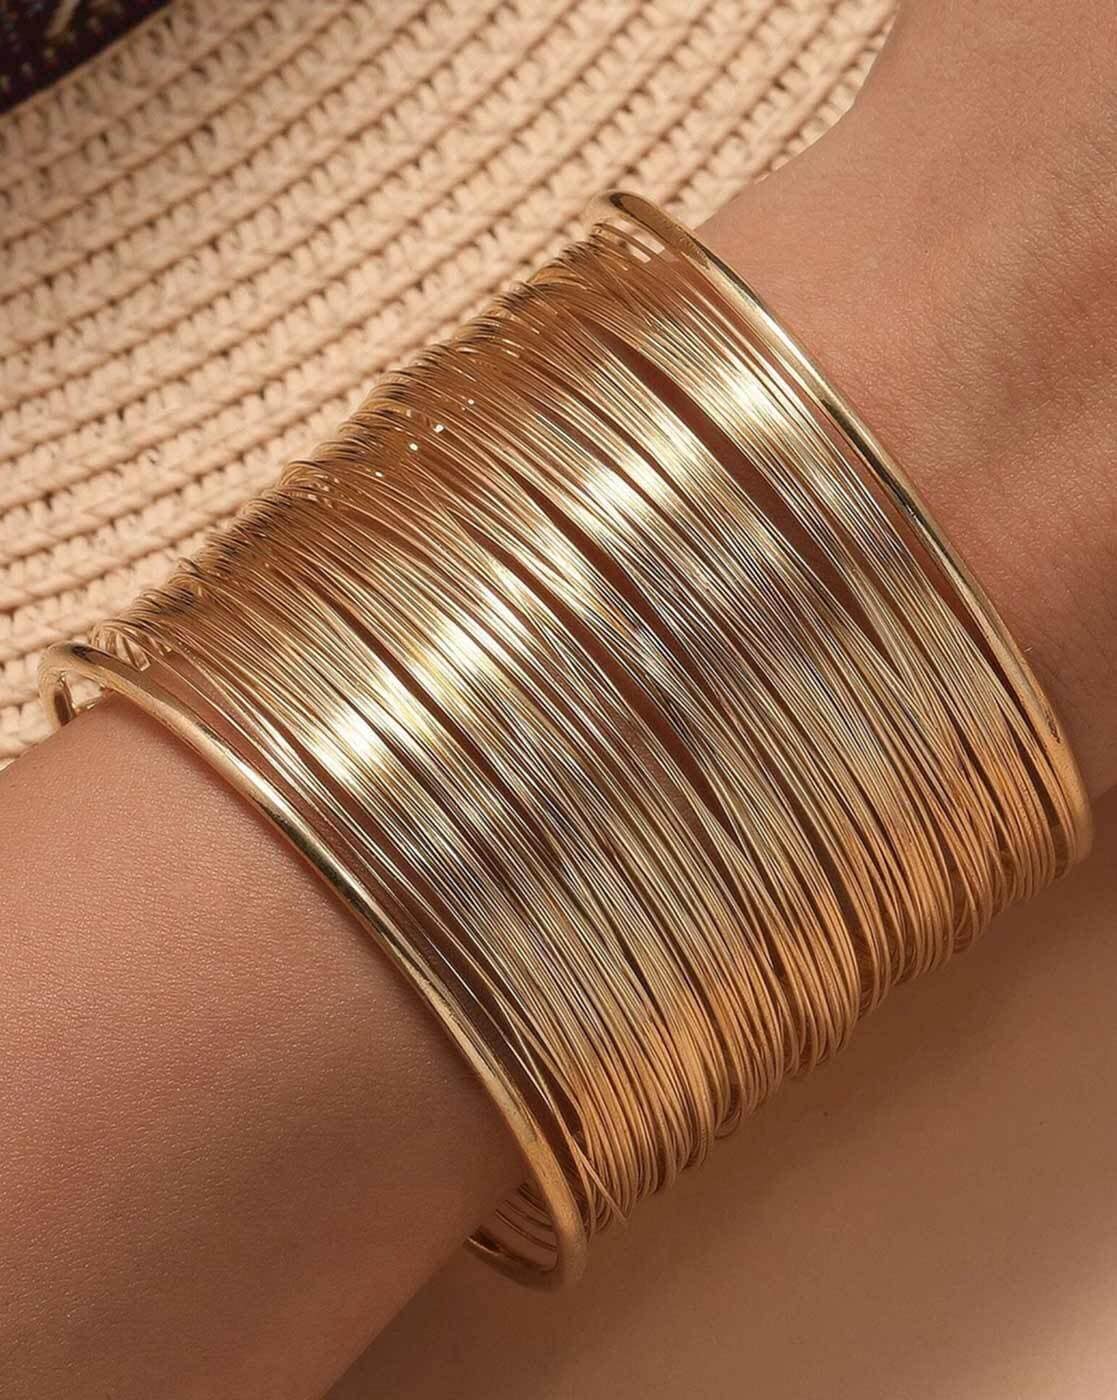 How To Stack Your Bracelets | Missoma